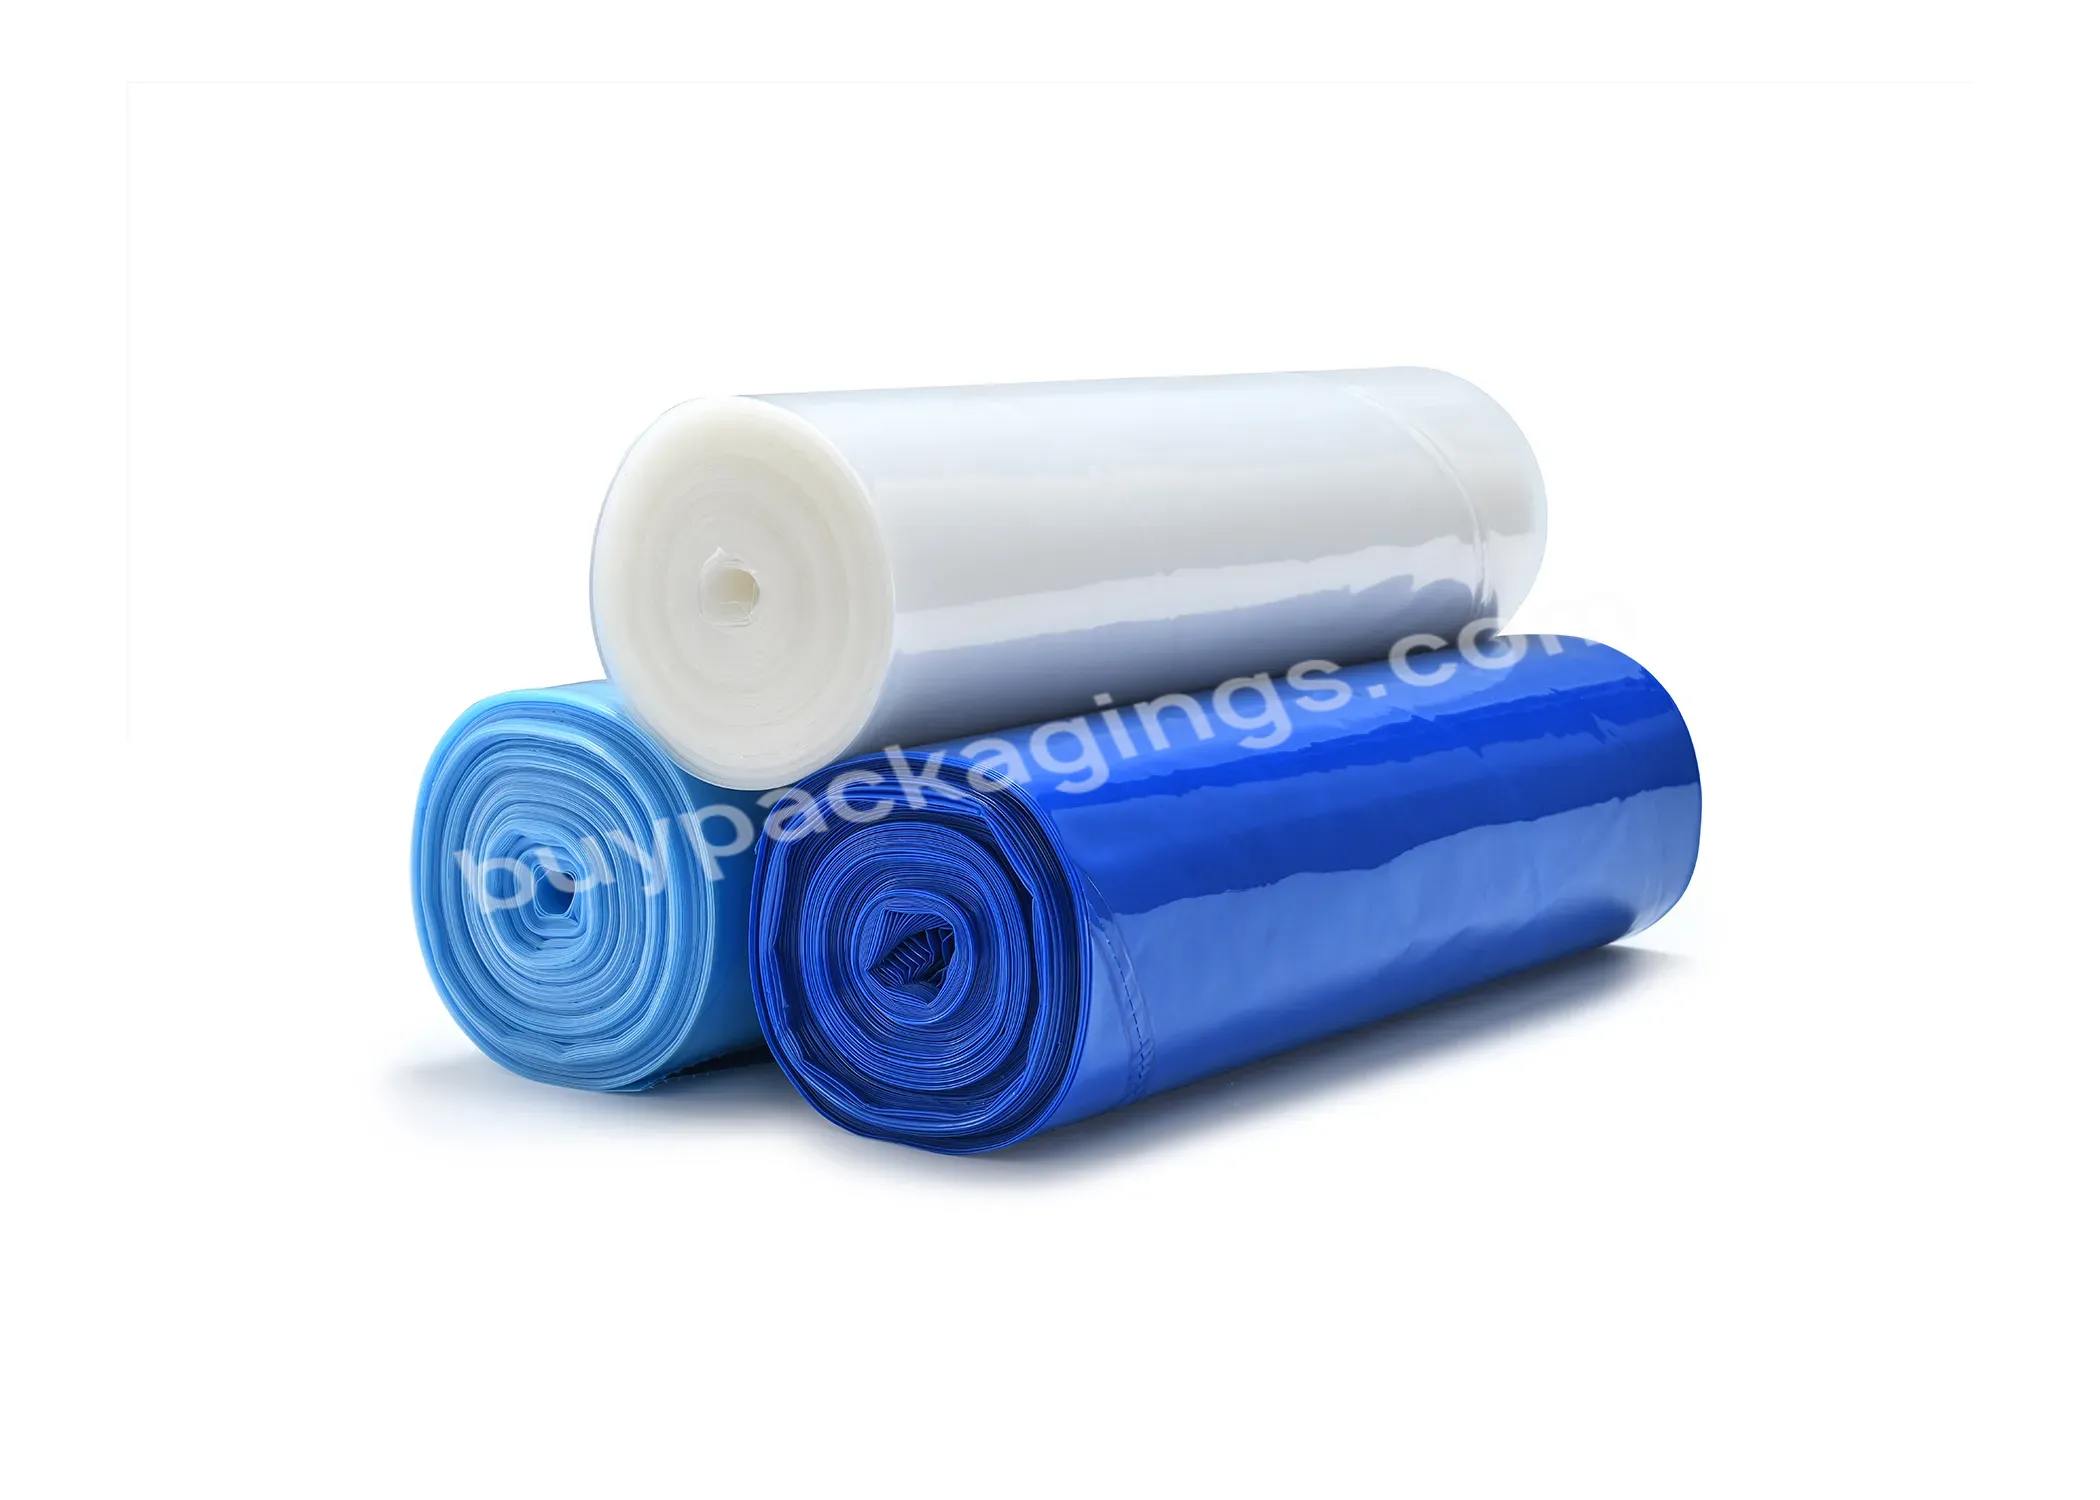 Recyclable Pe Piping Bags Disposable Customize Edible Pastry Bag For Packaging Cream/butter - Buy Piping Bags Disposable,Cake Decorating Supplies,Baking & Pastry Tools.